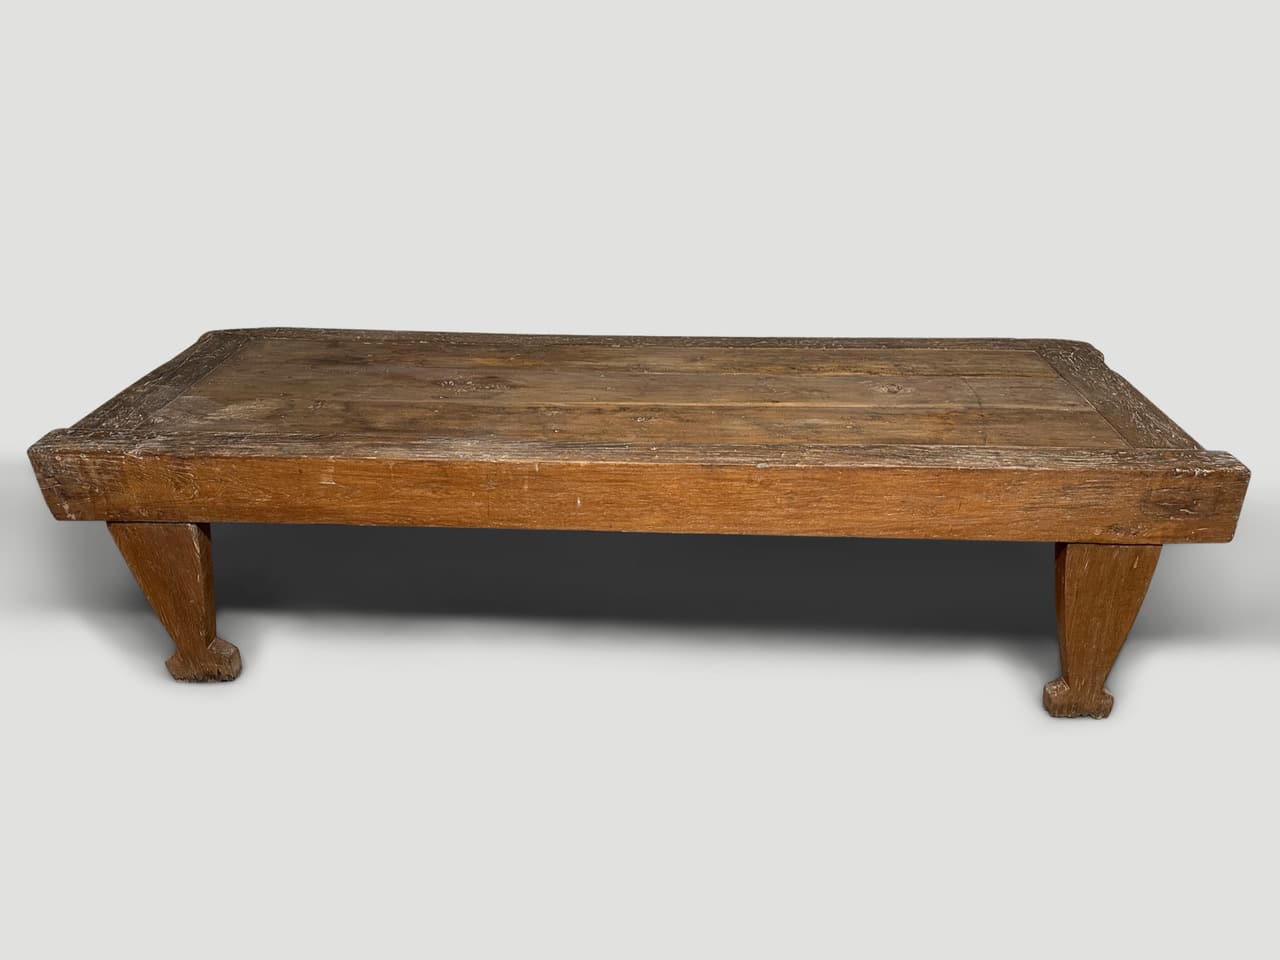 ANTIQUE BENCH, DAYBED OR COFFEE TABLE